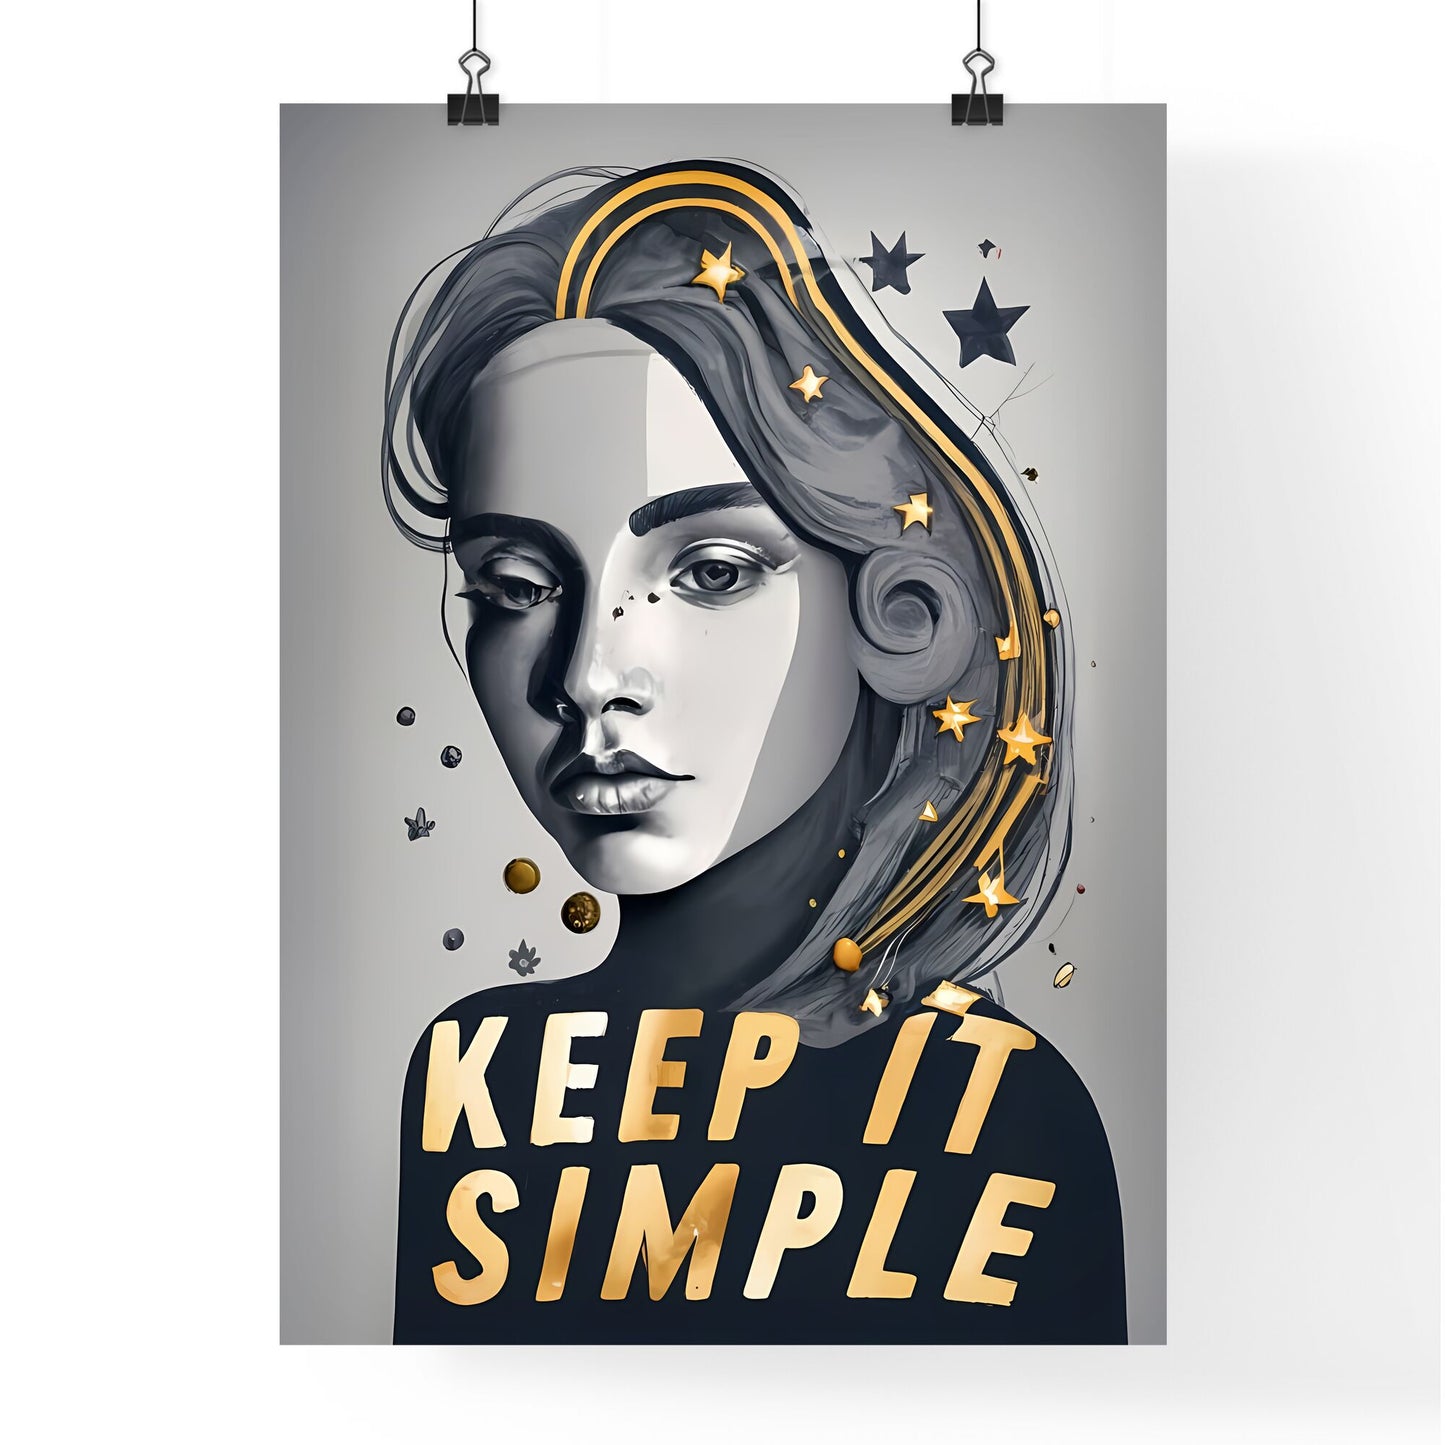 Keep It Simple - A Woman With Long Hair And Stars Default Title